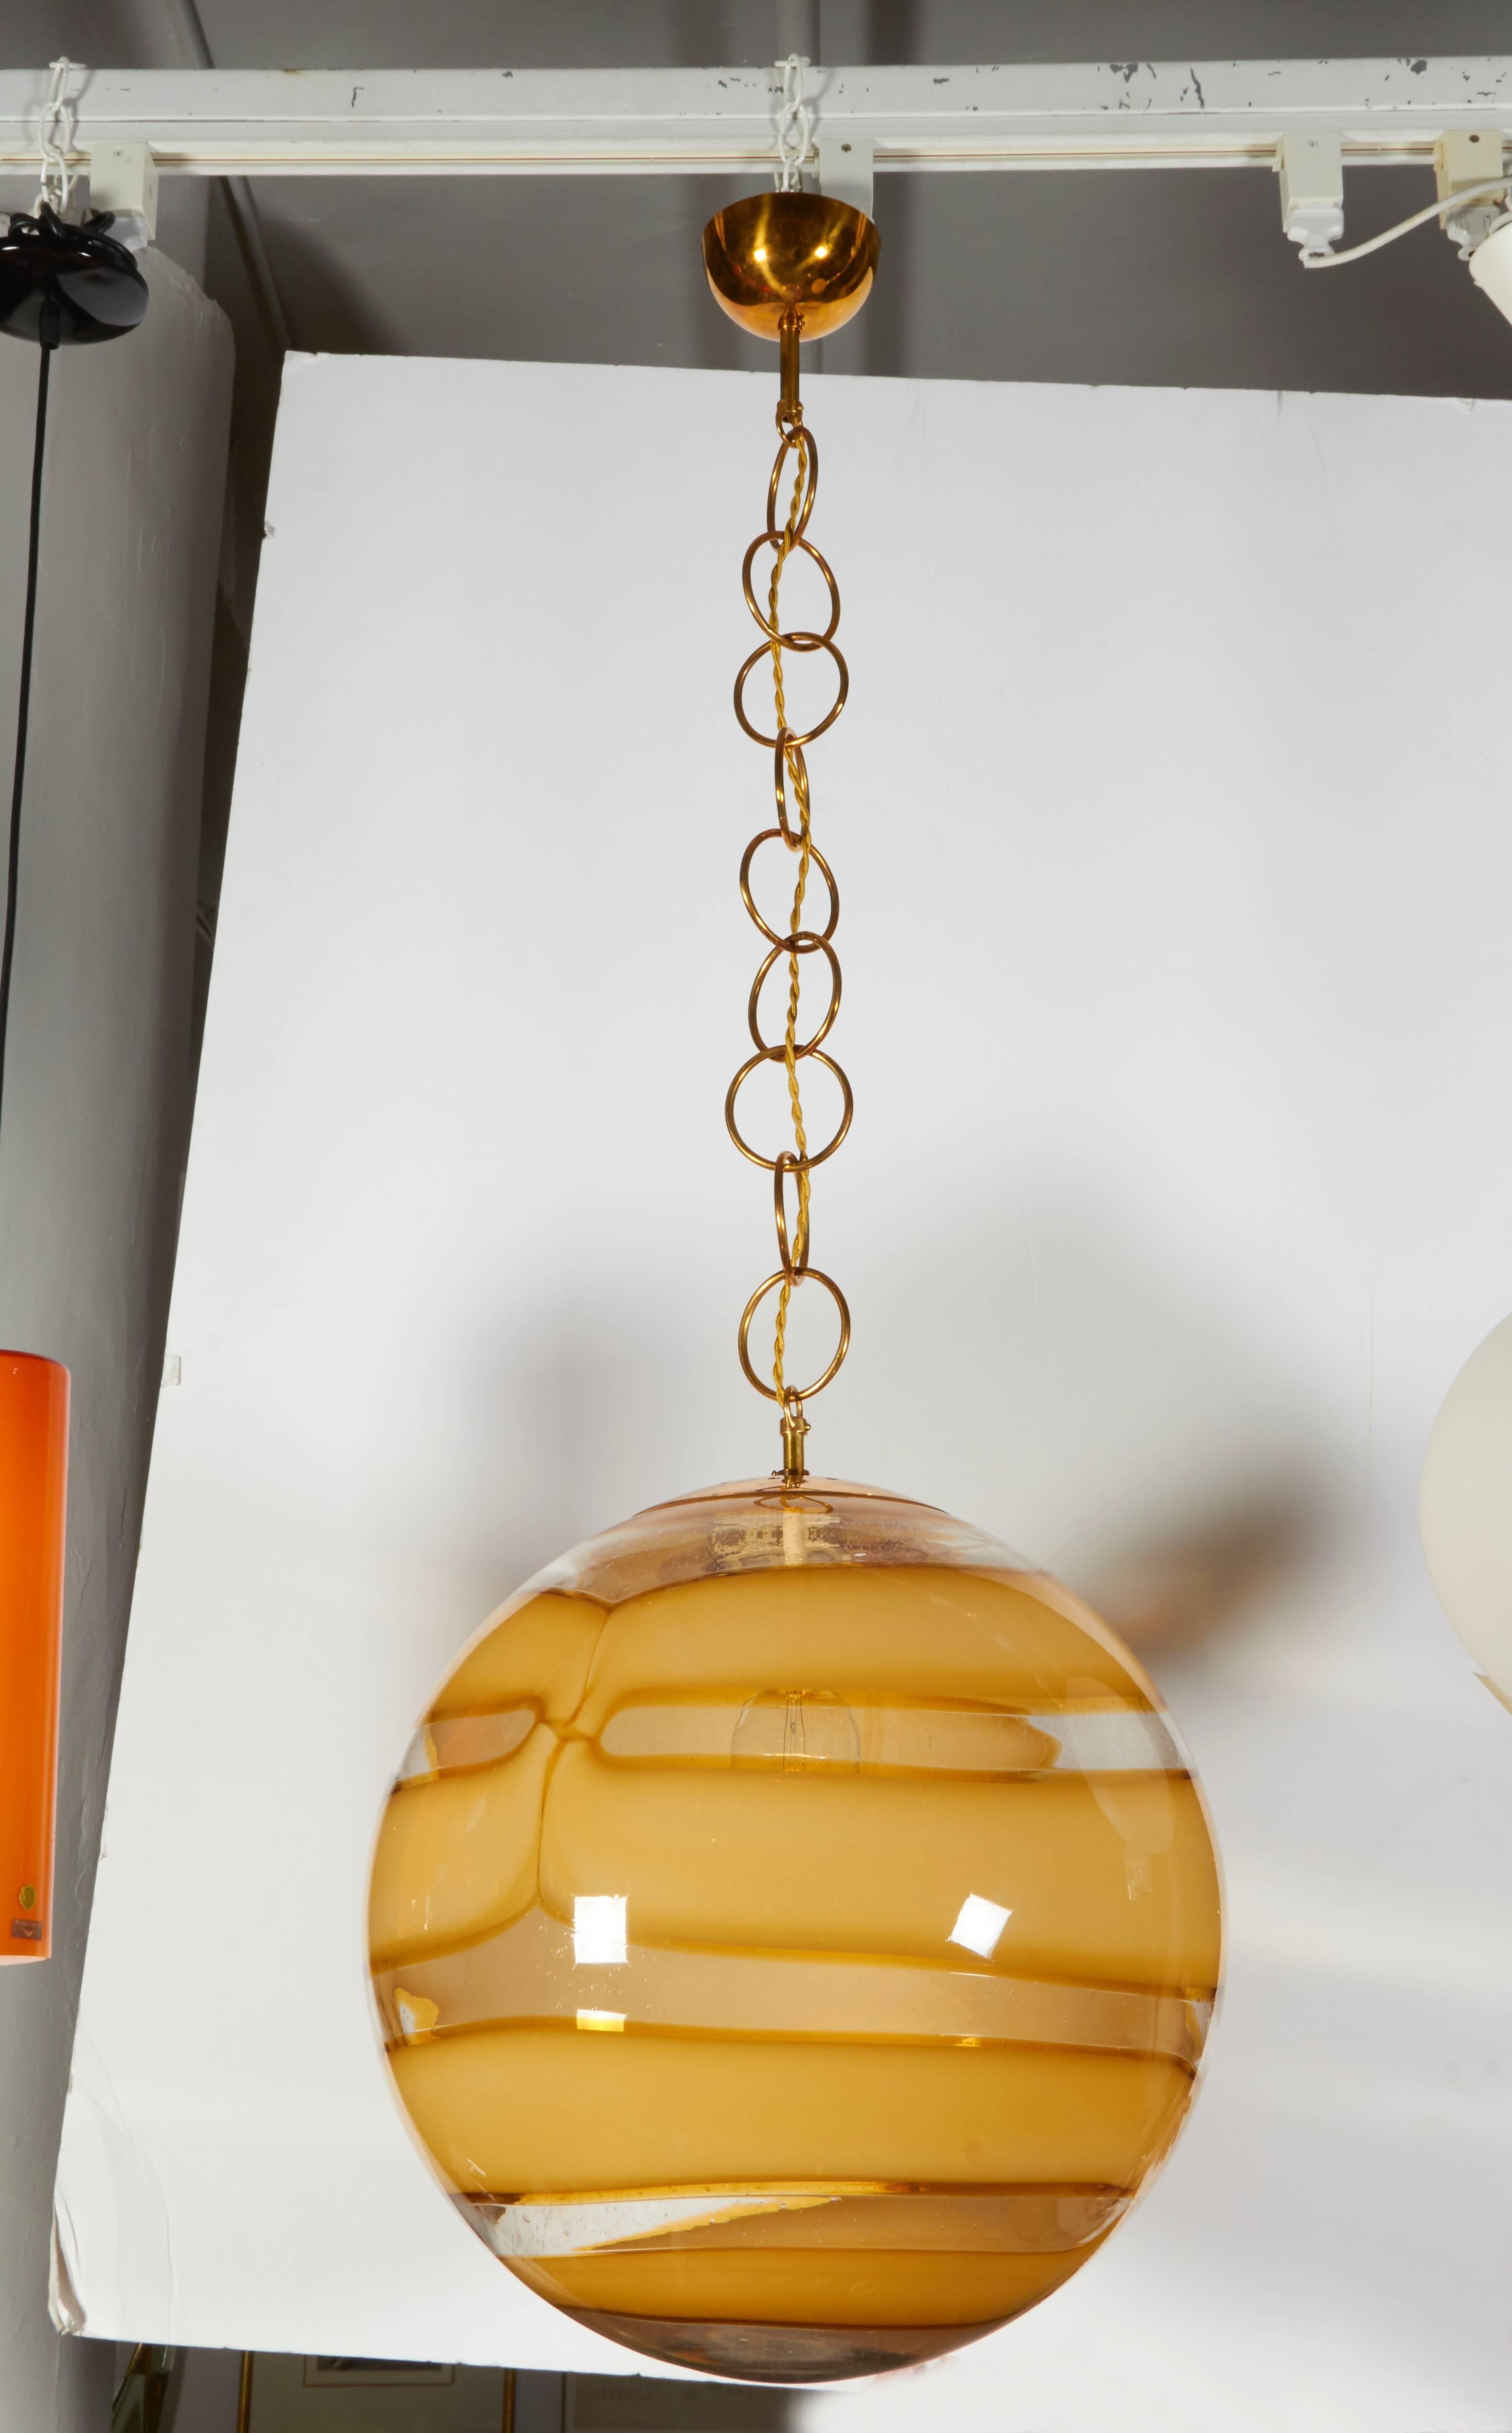 A Classic Murano globe pendant with rich amber coloring and superior brass hardware. The length of the chain can be adjusted to your needs.